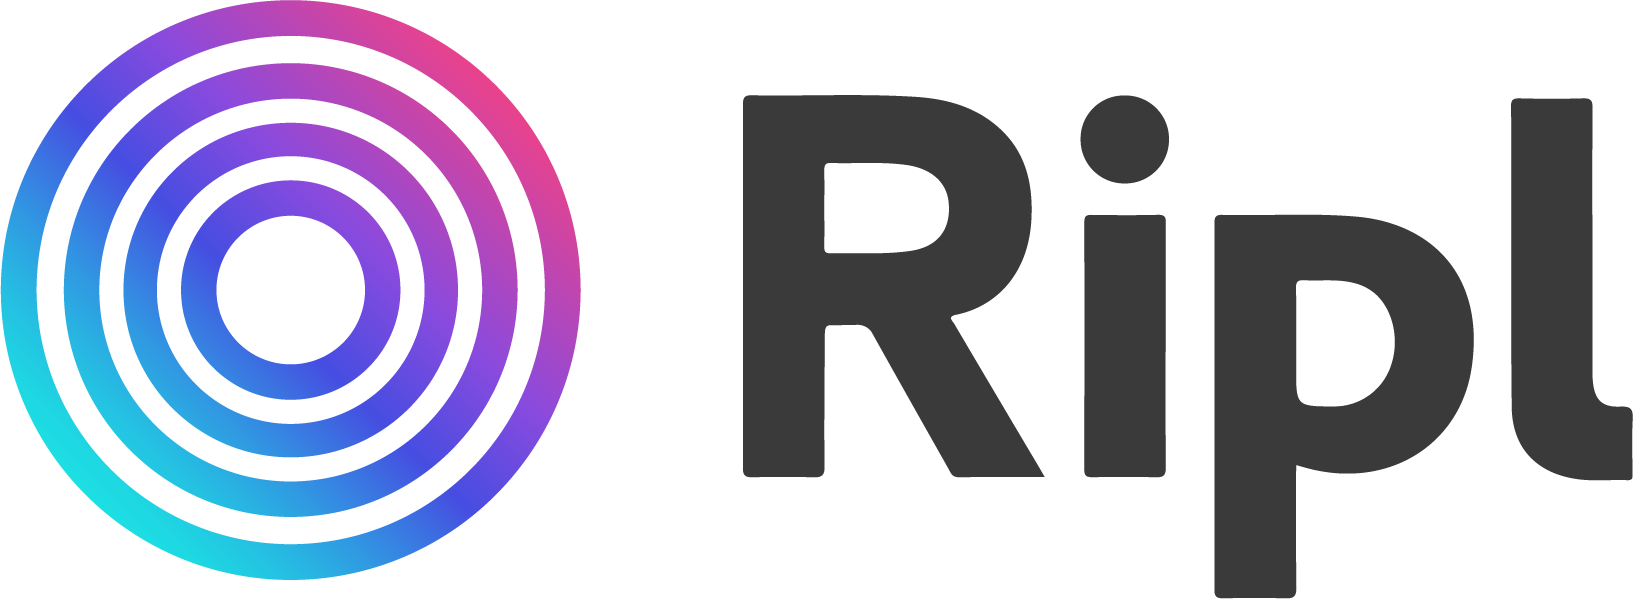 Ripl-Create Animated Social Posts in Seconds